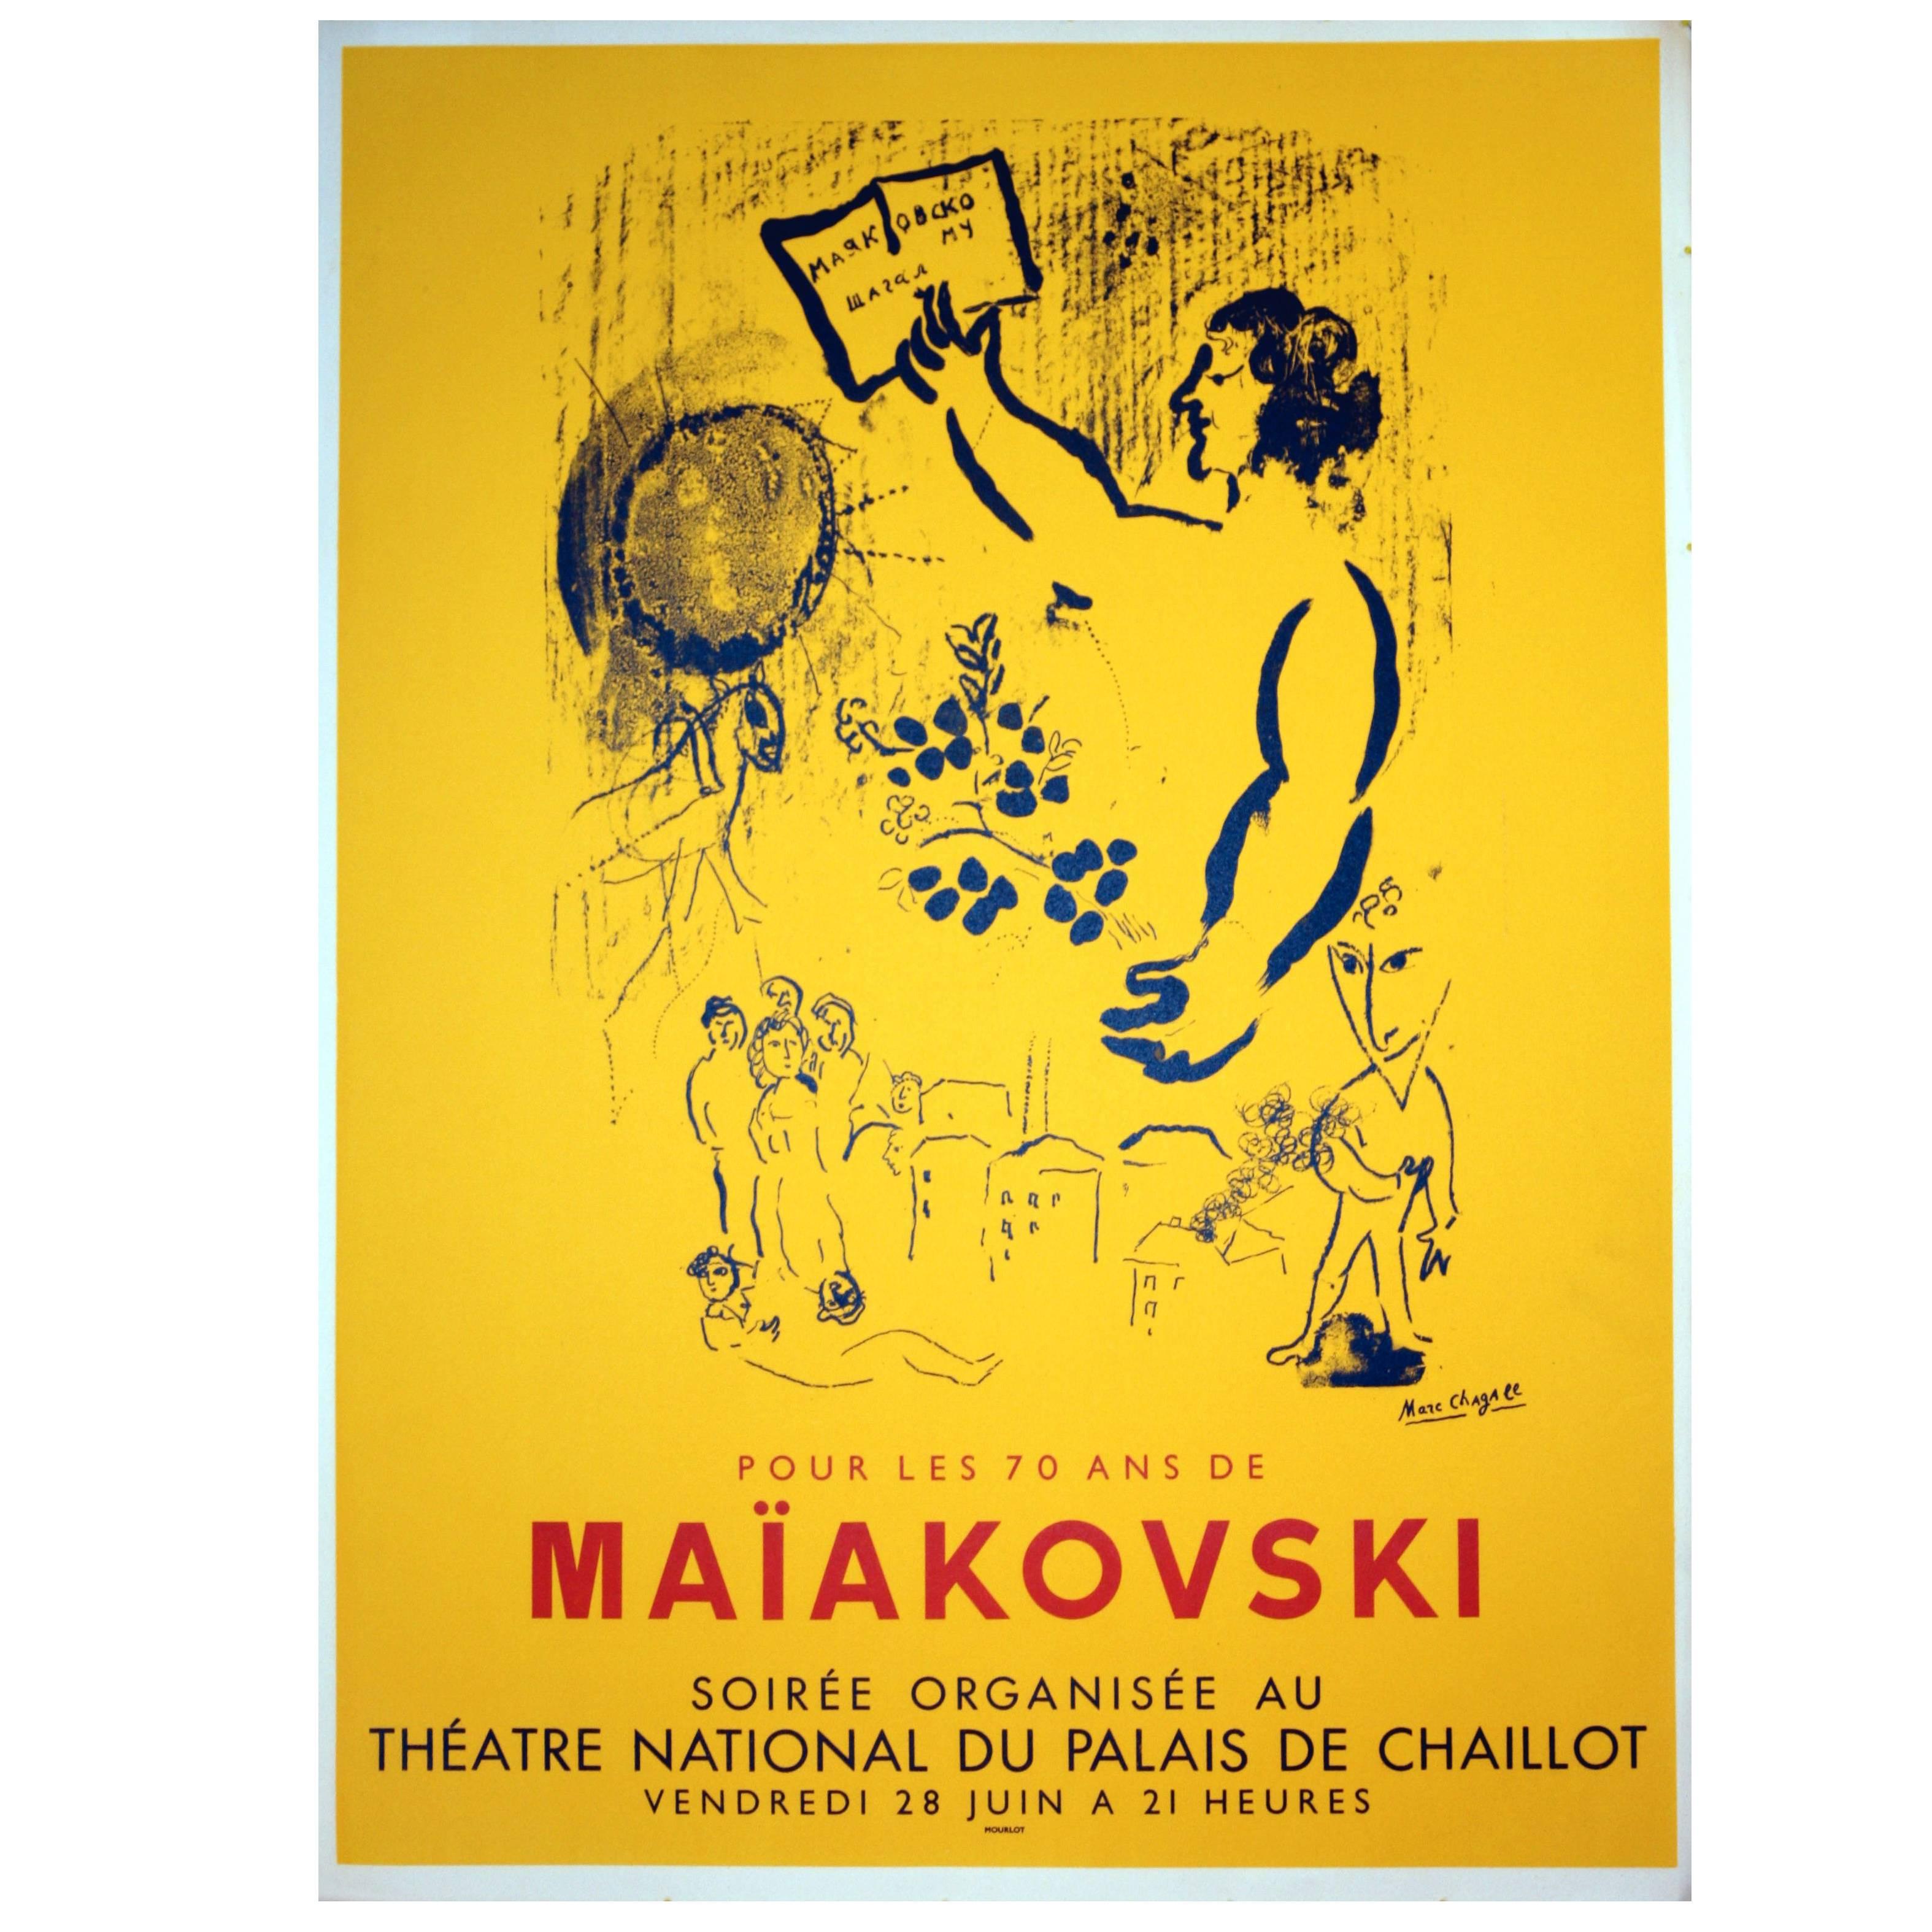 Original Vintage Poster by Marc Chagall for a Vladimir Mayakovksy Poetry Reading